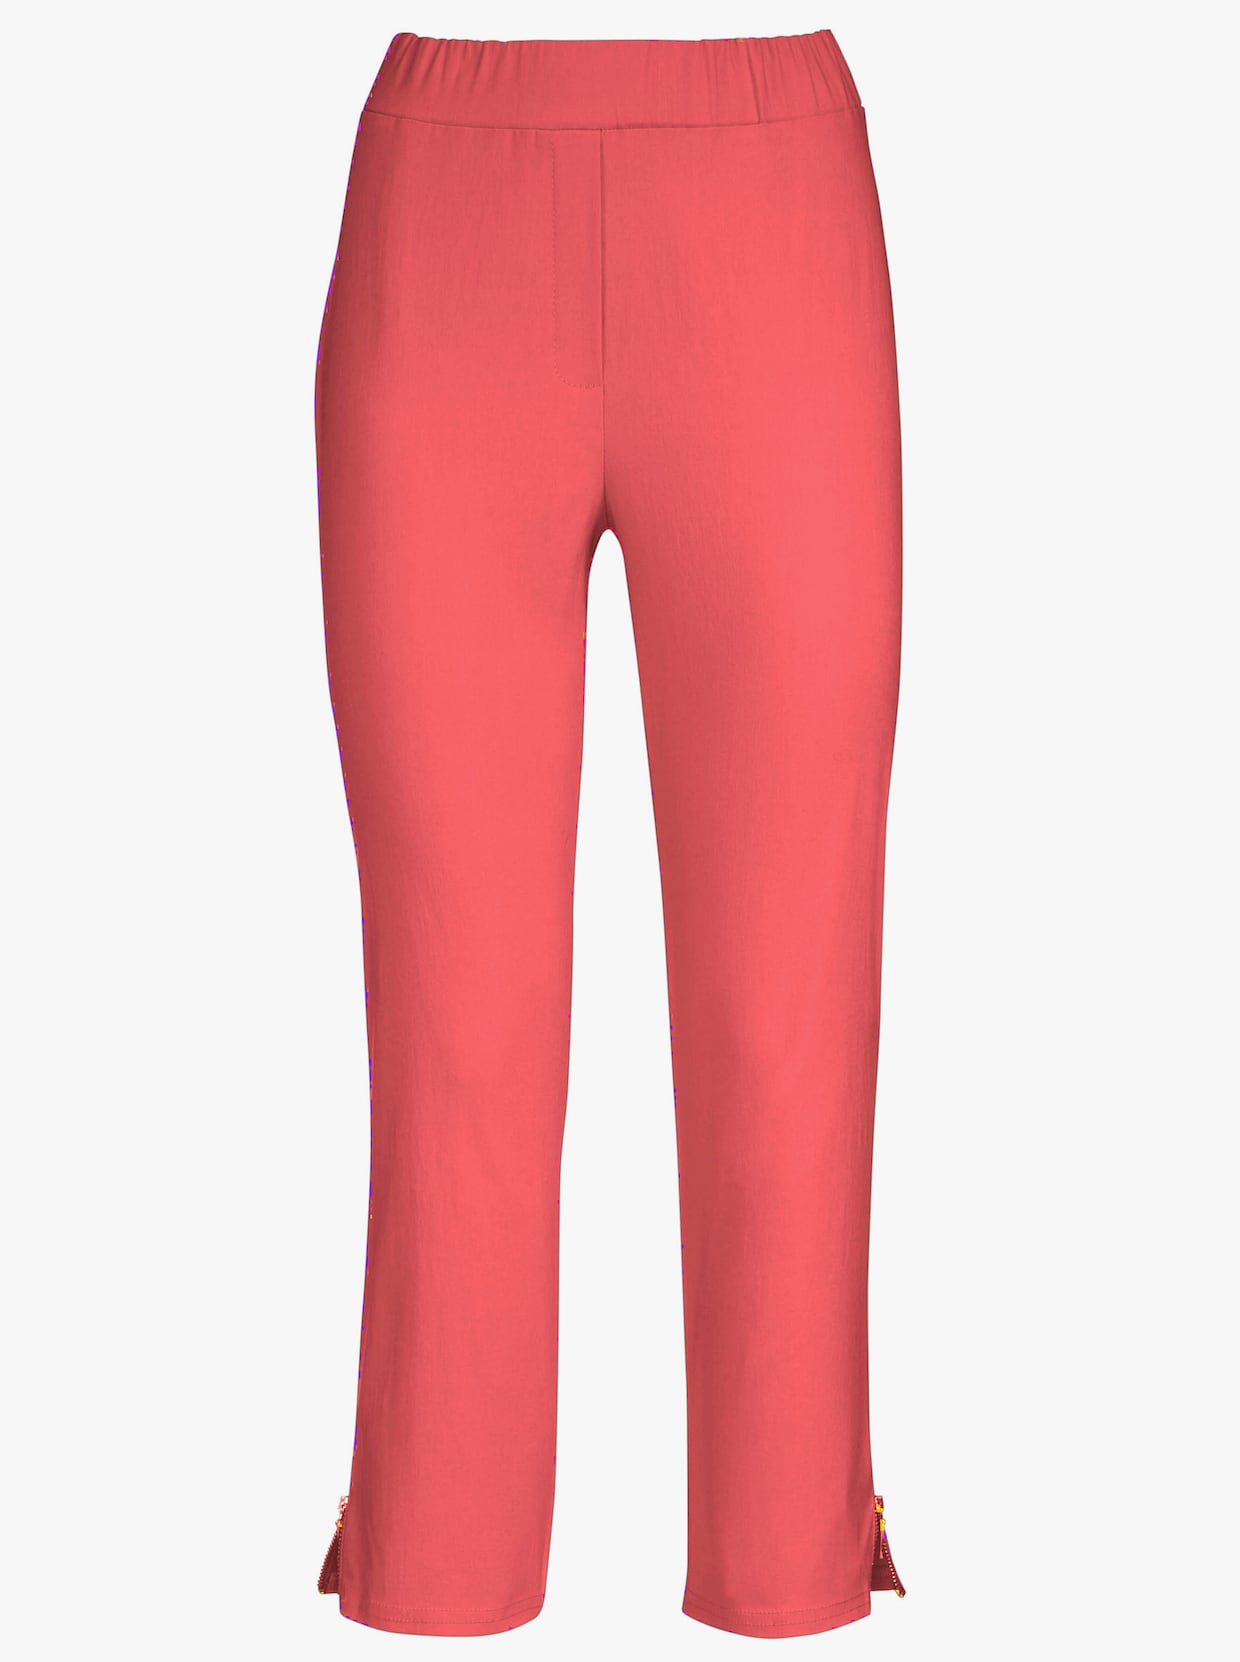 Adelina by Scheiter Pantalon 7/8 - rouge corail